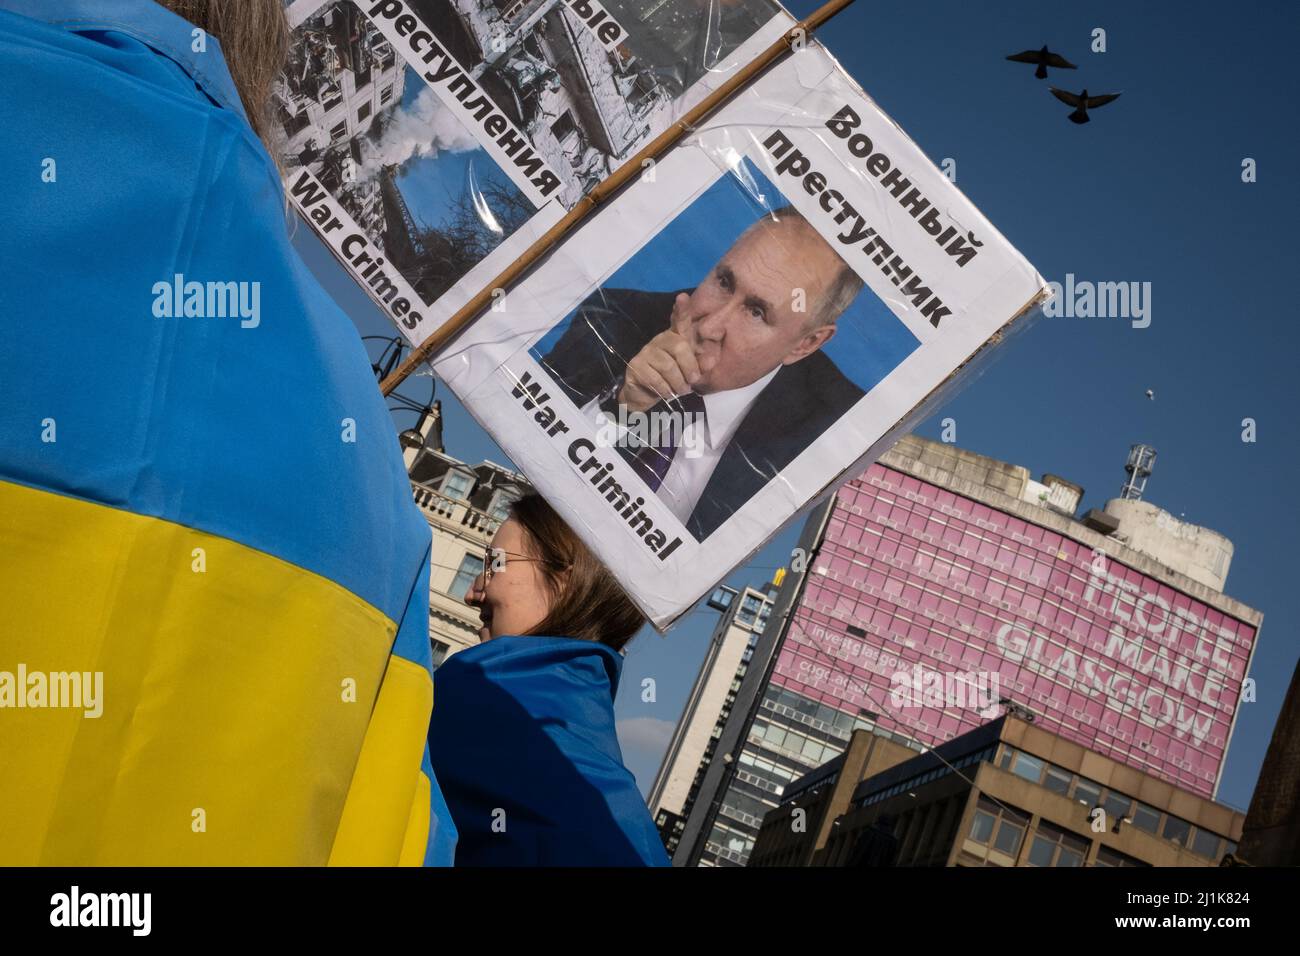 Glasgow, Scotland, 26 March 2022. Stand with Ukraine rally in support of the country in its current war against the invasion by President PutinÕs Russia, in George Square, in Glasgow, Scotland, 26 March 2022. Photo credit: Jeremy Sutton-Hibbert/Alamy Live News. Stock Photo